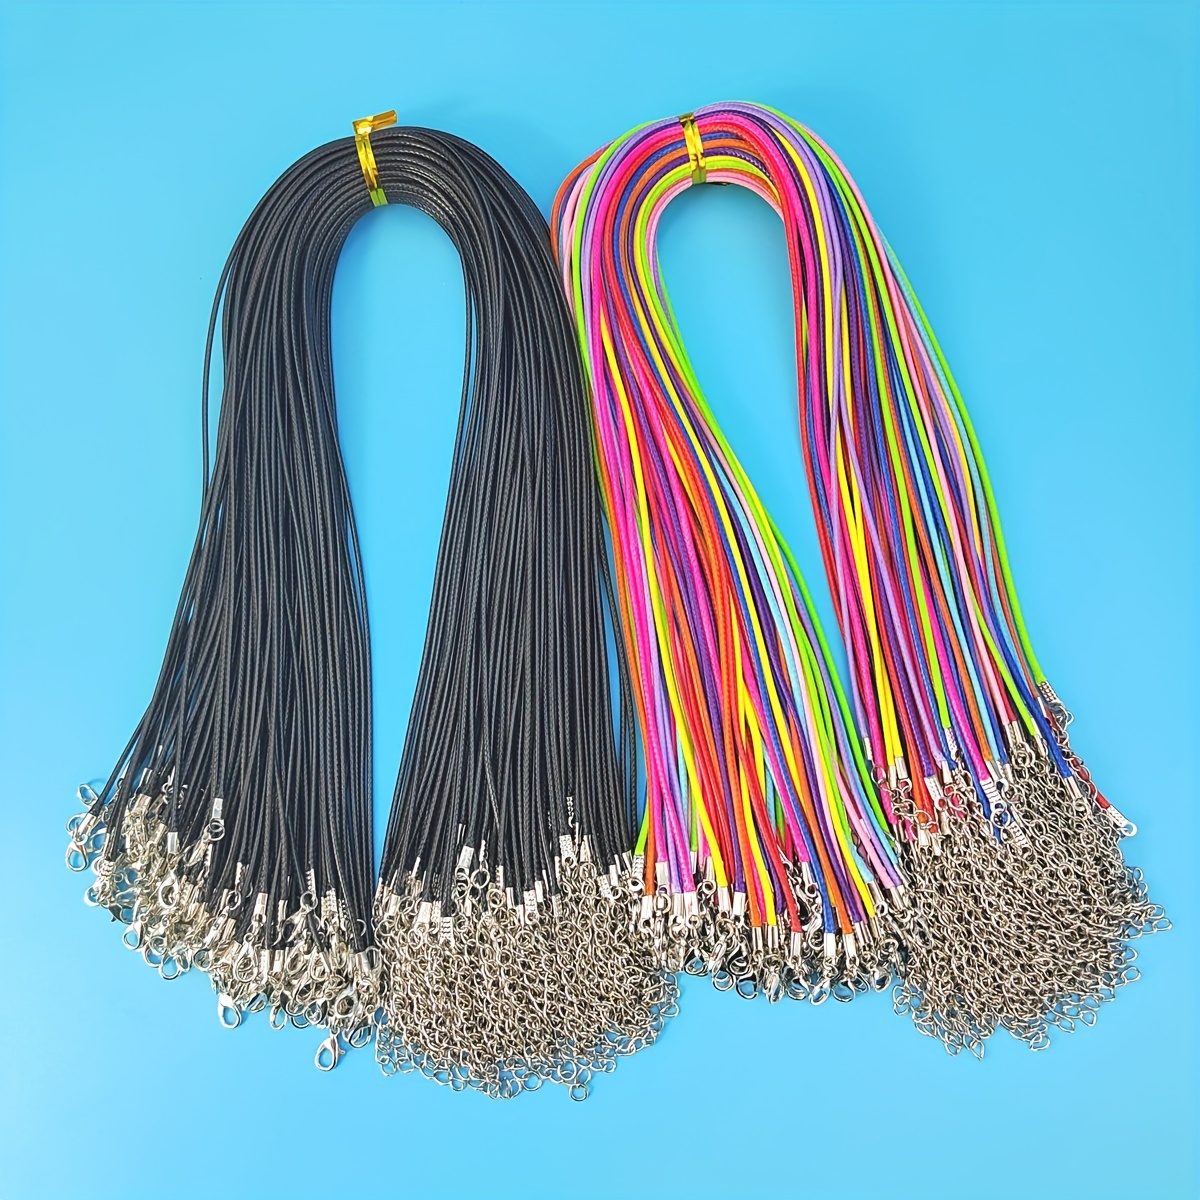 

100pcs Leather Necklace Wax Rope Buckle Black Colorful 1.5mm (length 45cm/18inch) Necklace Chain Bulk For Diy Jewelry Making Supplies Accessories Unisex Daily Matching